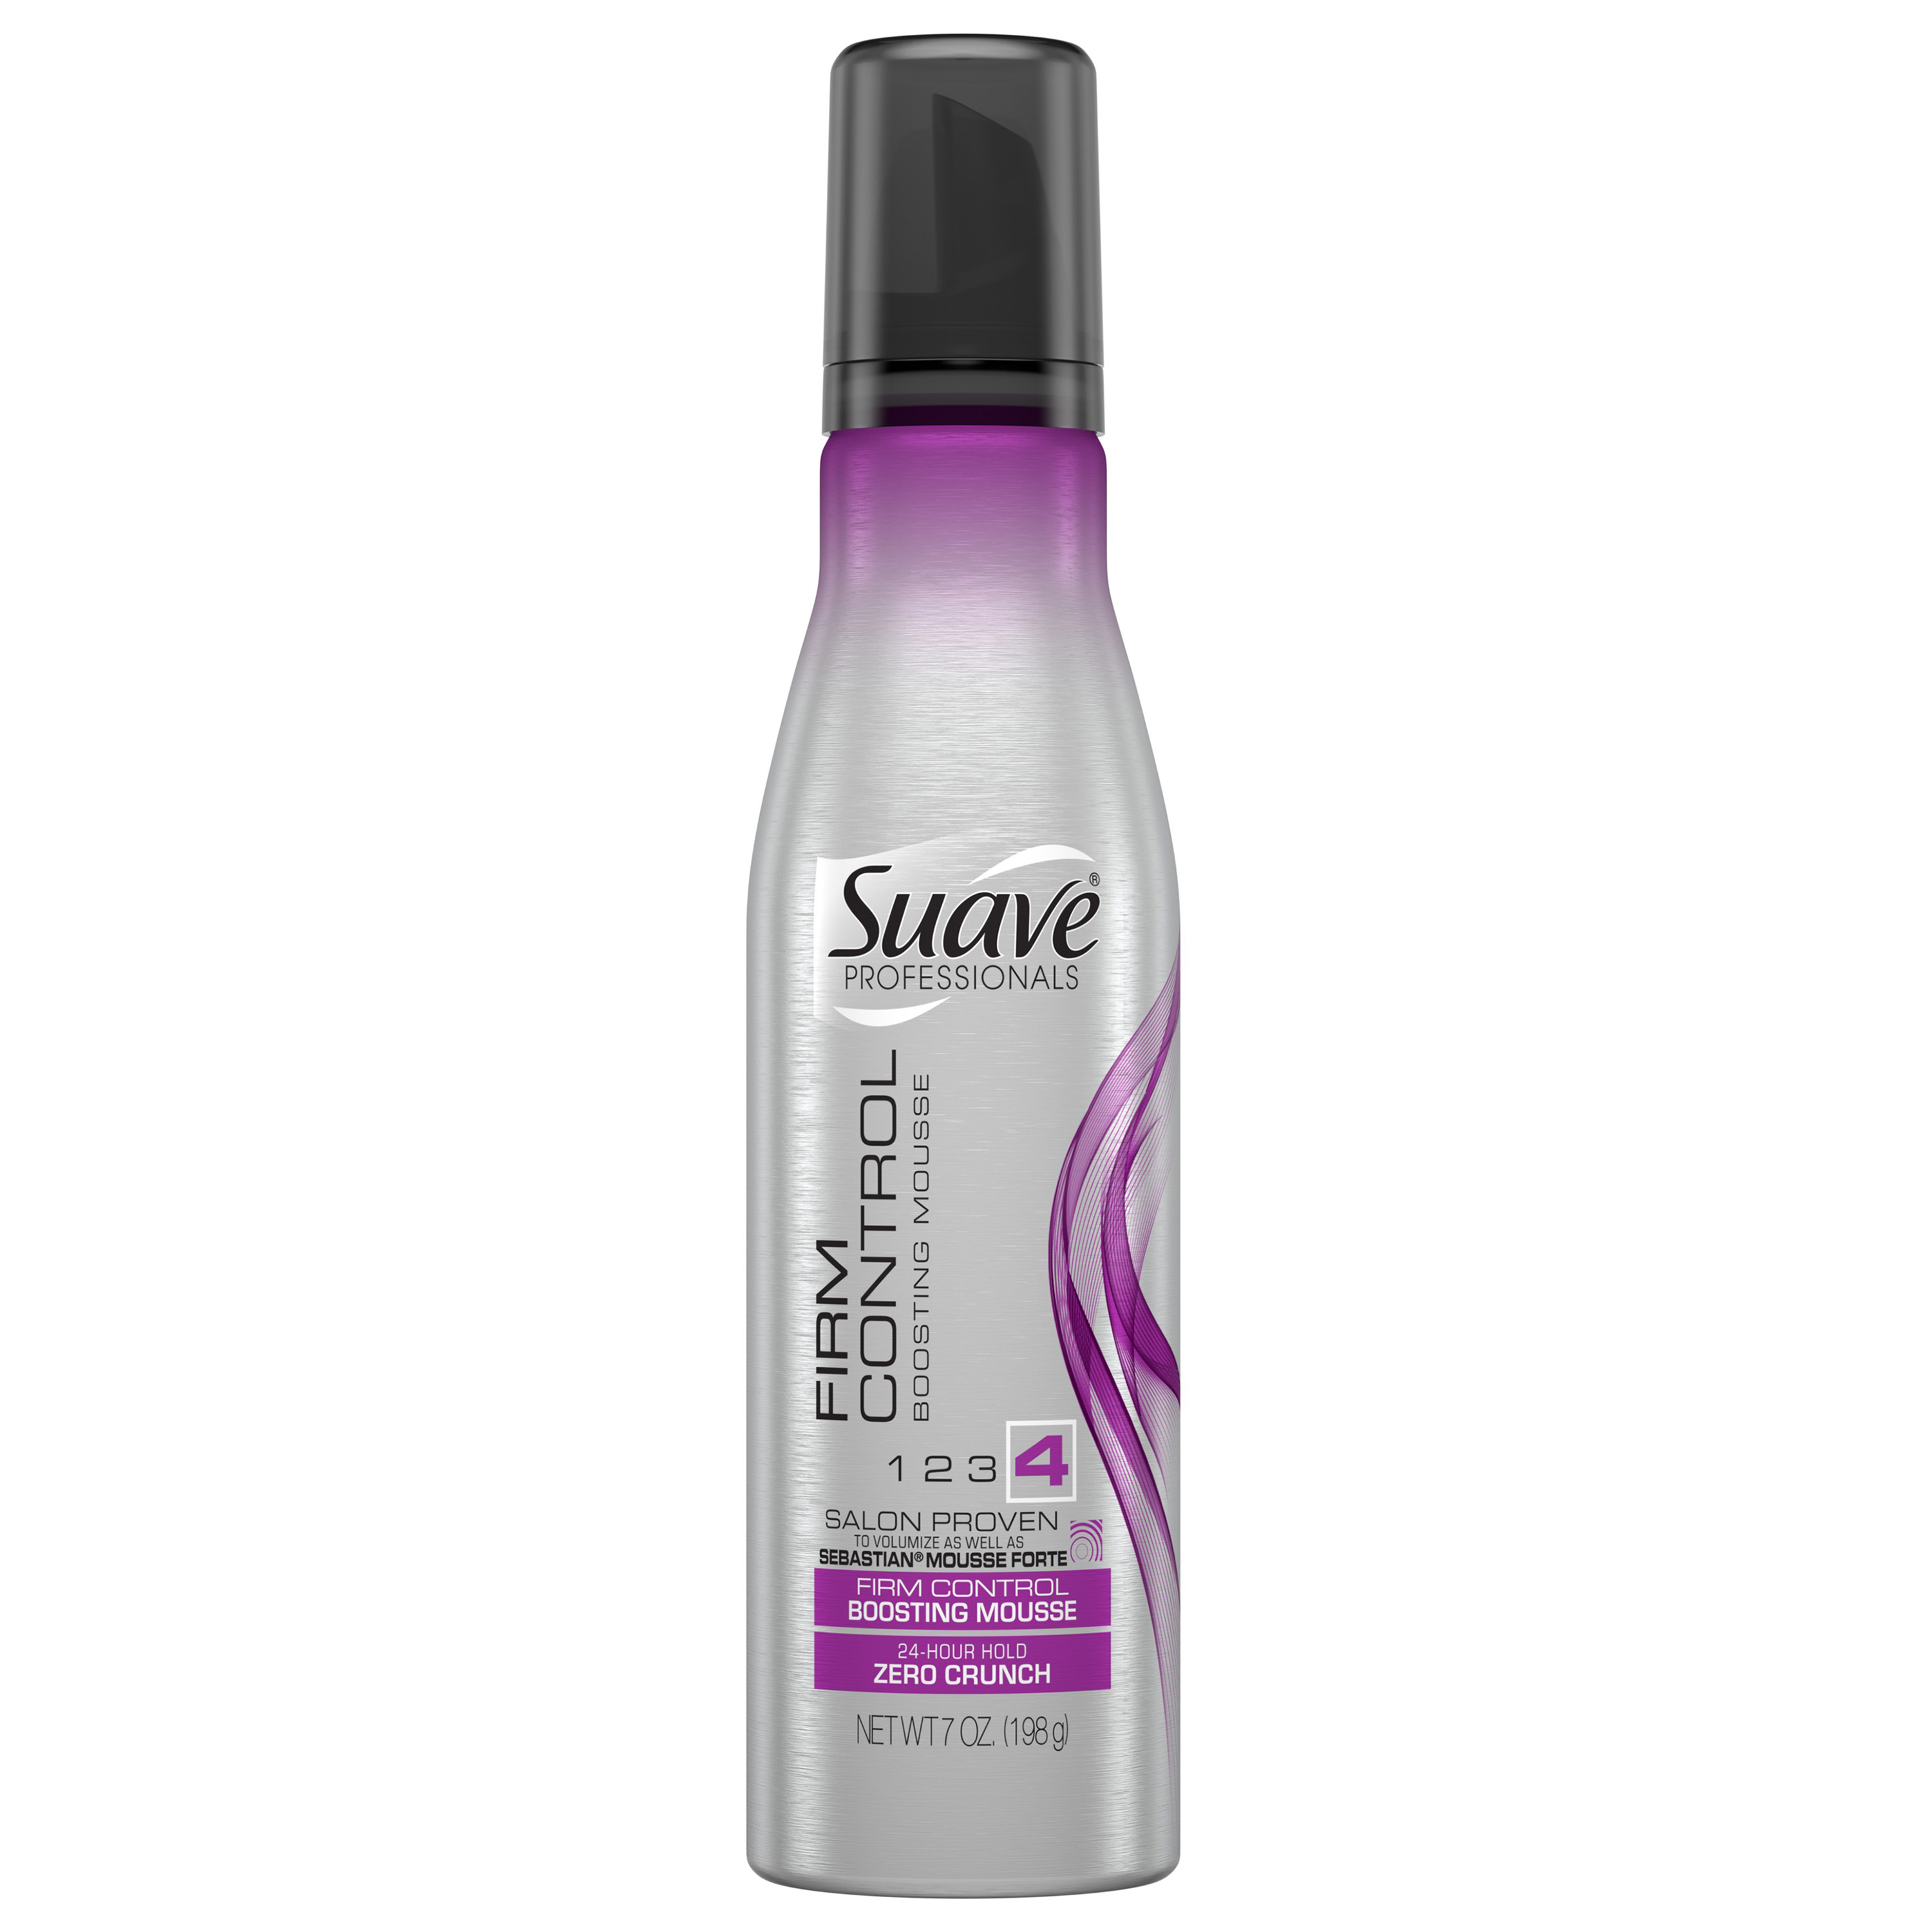 Suave Professionals Volumizing Spray Firm Control Boosting Hair Styling Mousse with Collagen, 7 oz - image 1 of 9